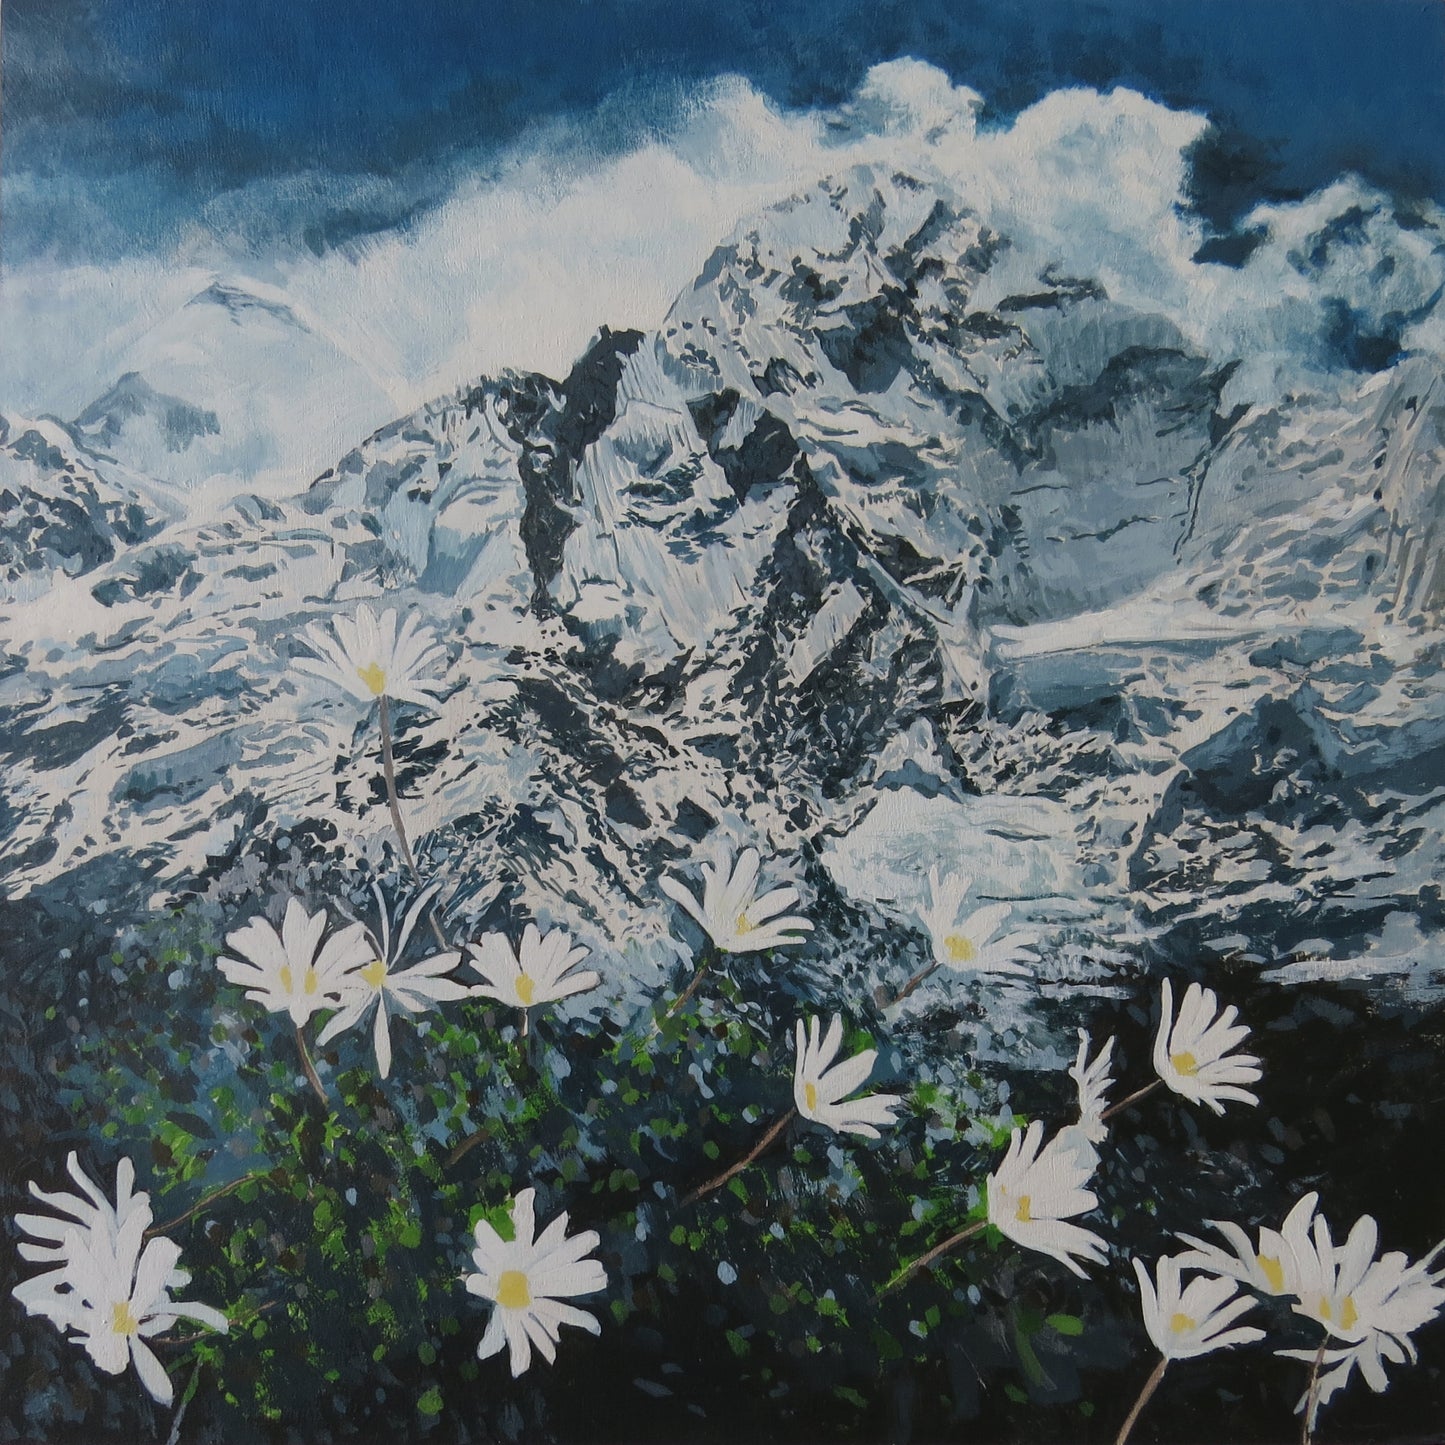 Everest and flowers